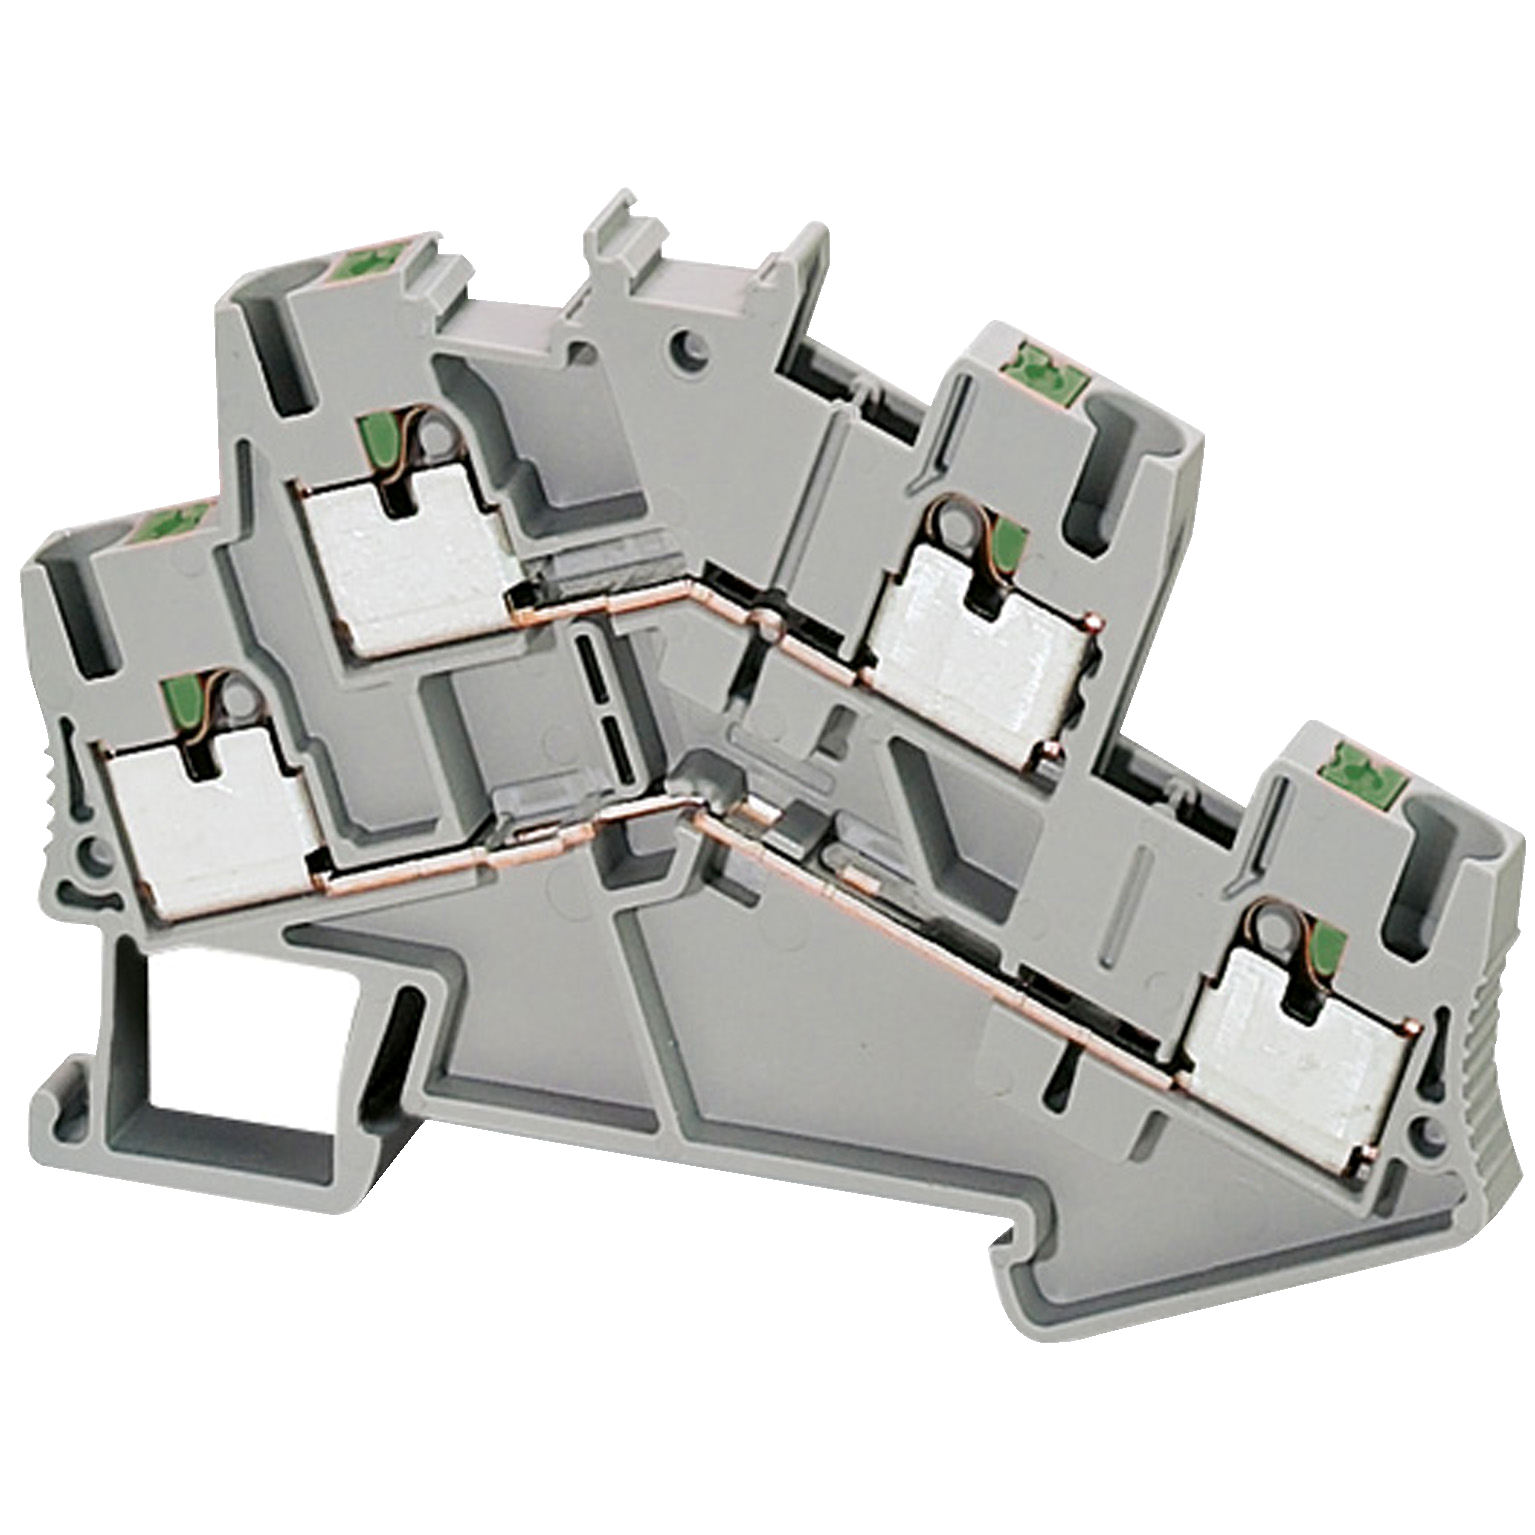 Terminal block, Linergy TR, push-in type, feed through, 2 level, 4 points, 2.5mm², grey, set of 50